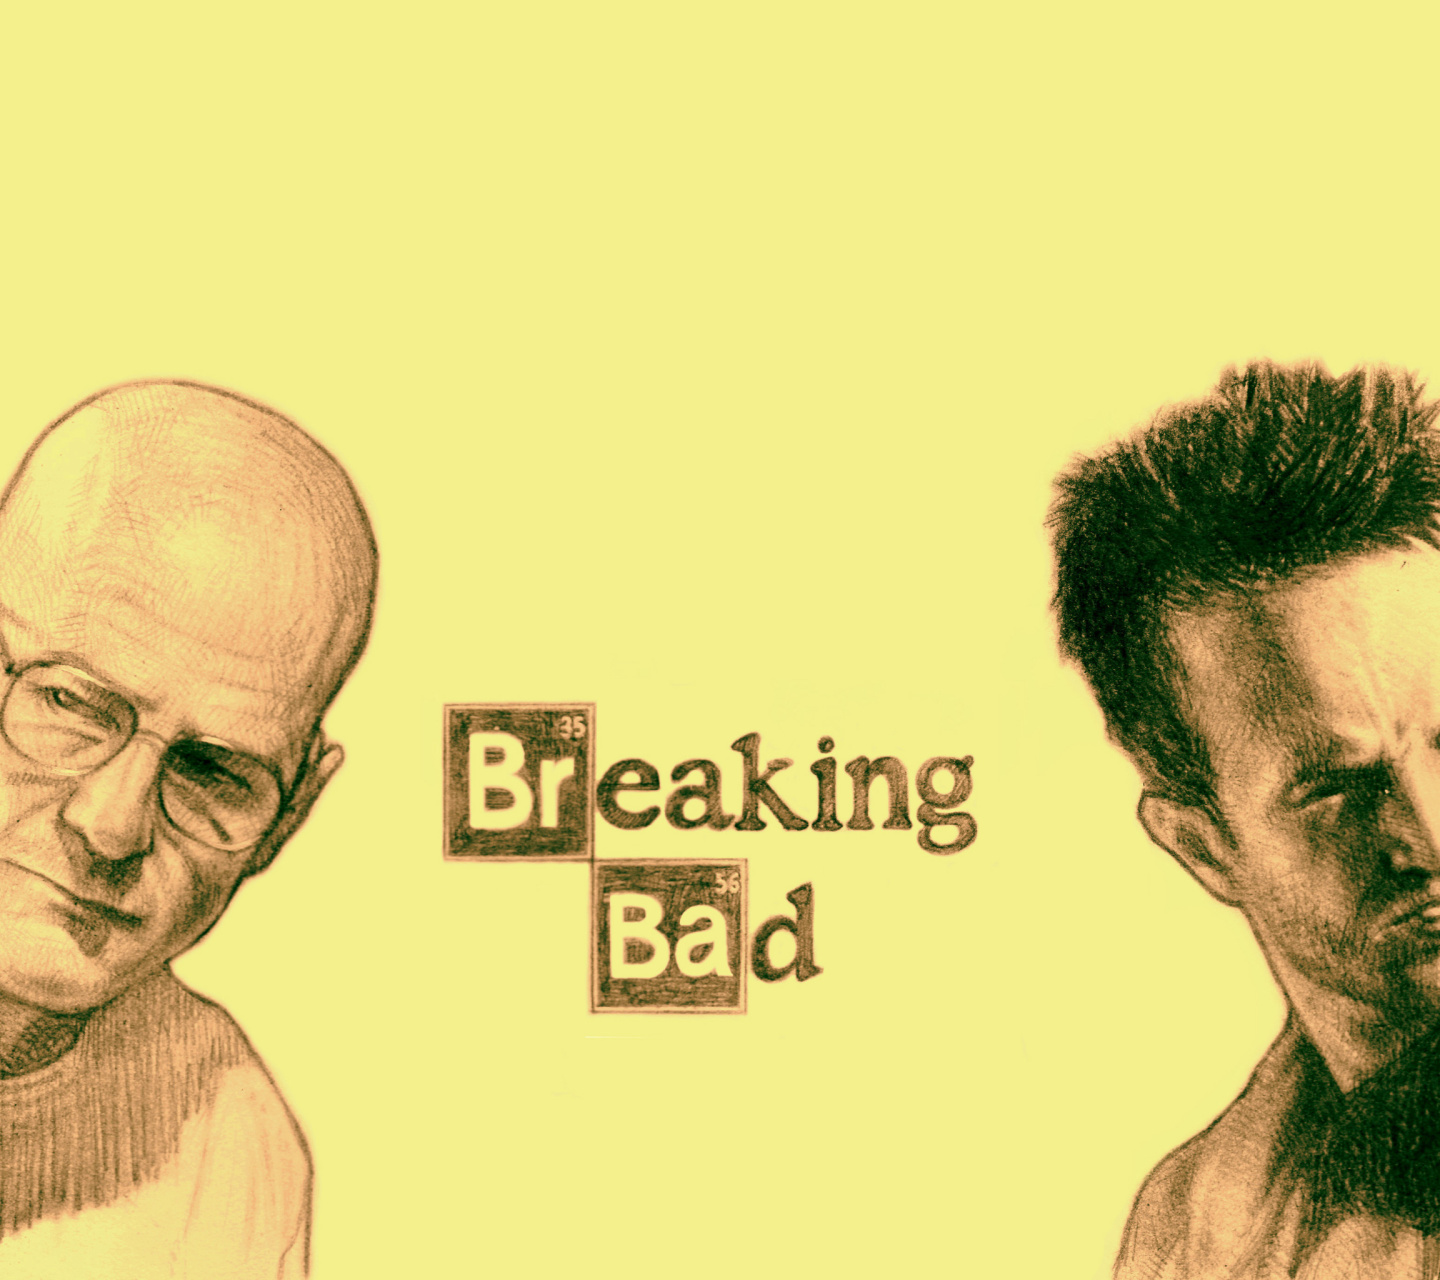 Walter White and Jesse Pinkman in Breaking Bad wallpaper 1440x1280